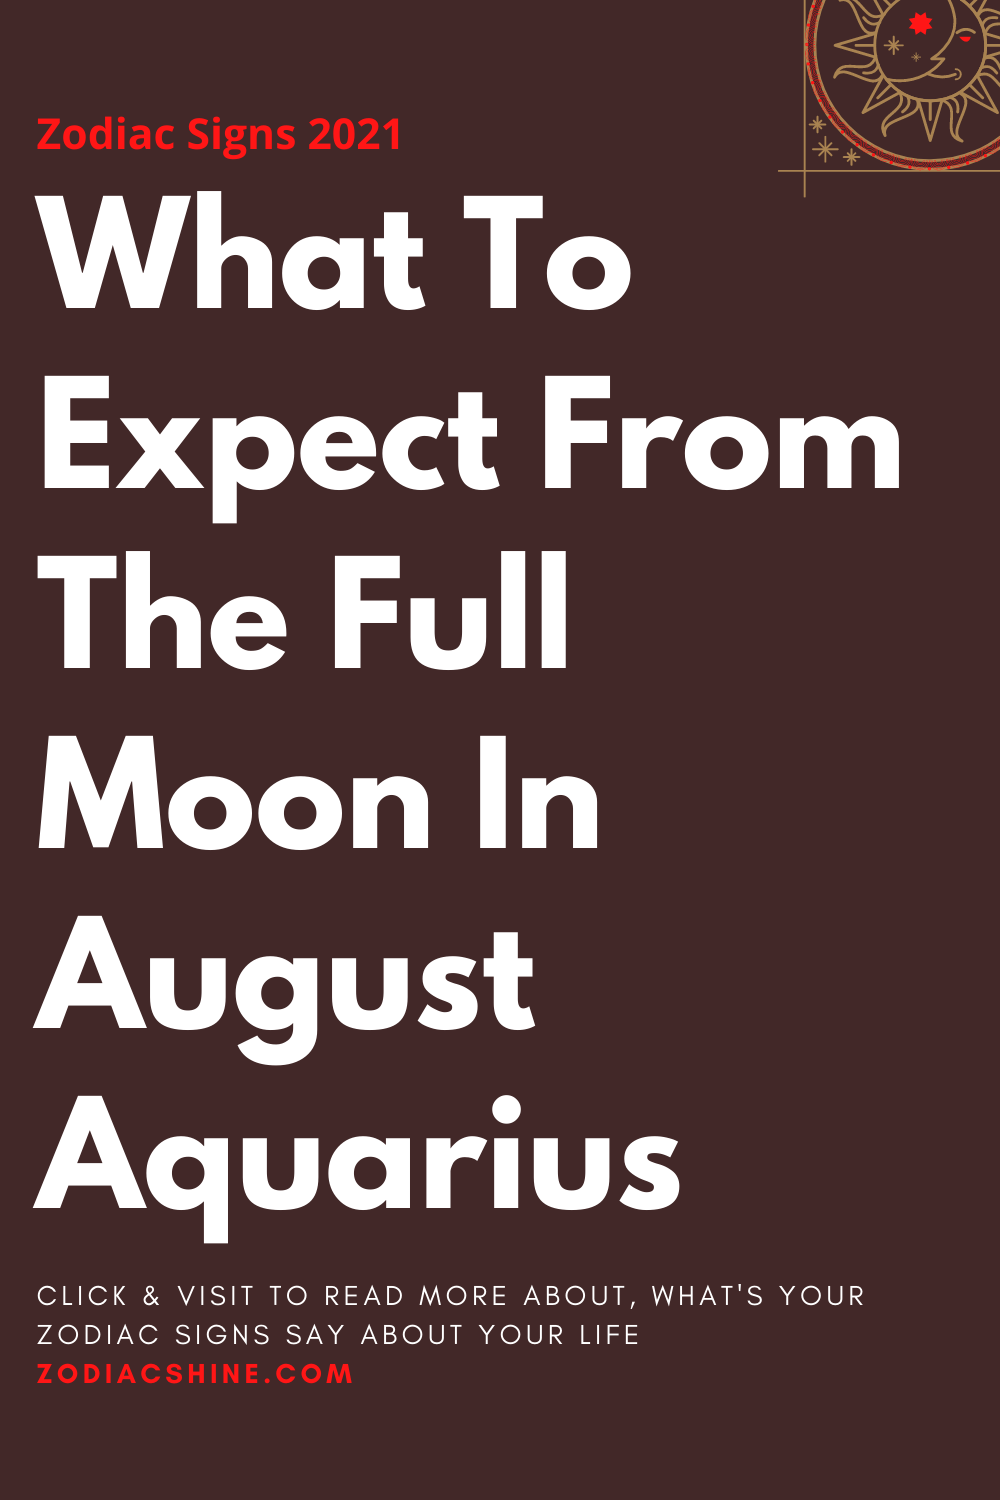 What To Expect From The Full Moon In August Aquarius